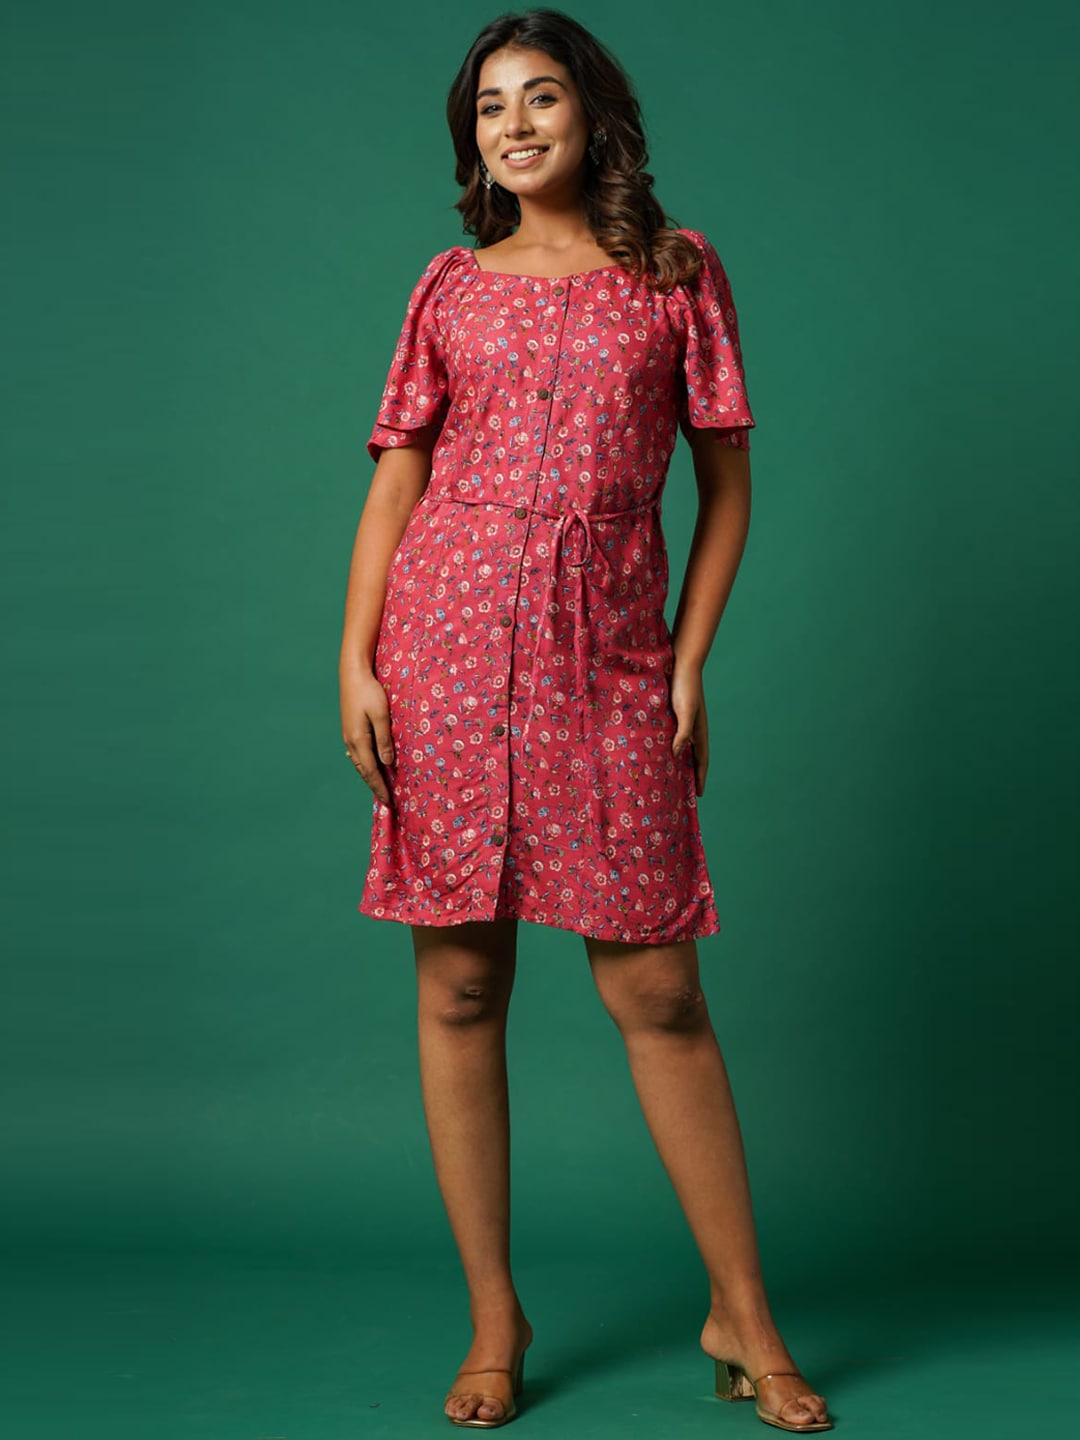 AUTUMN LANE Red Floral Shirt Cotton Dress Price in India